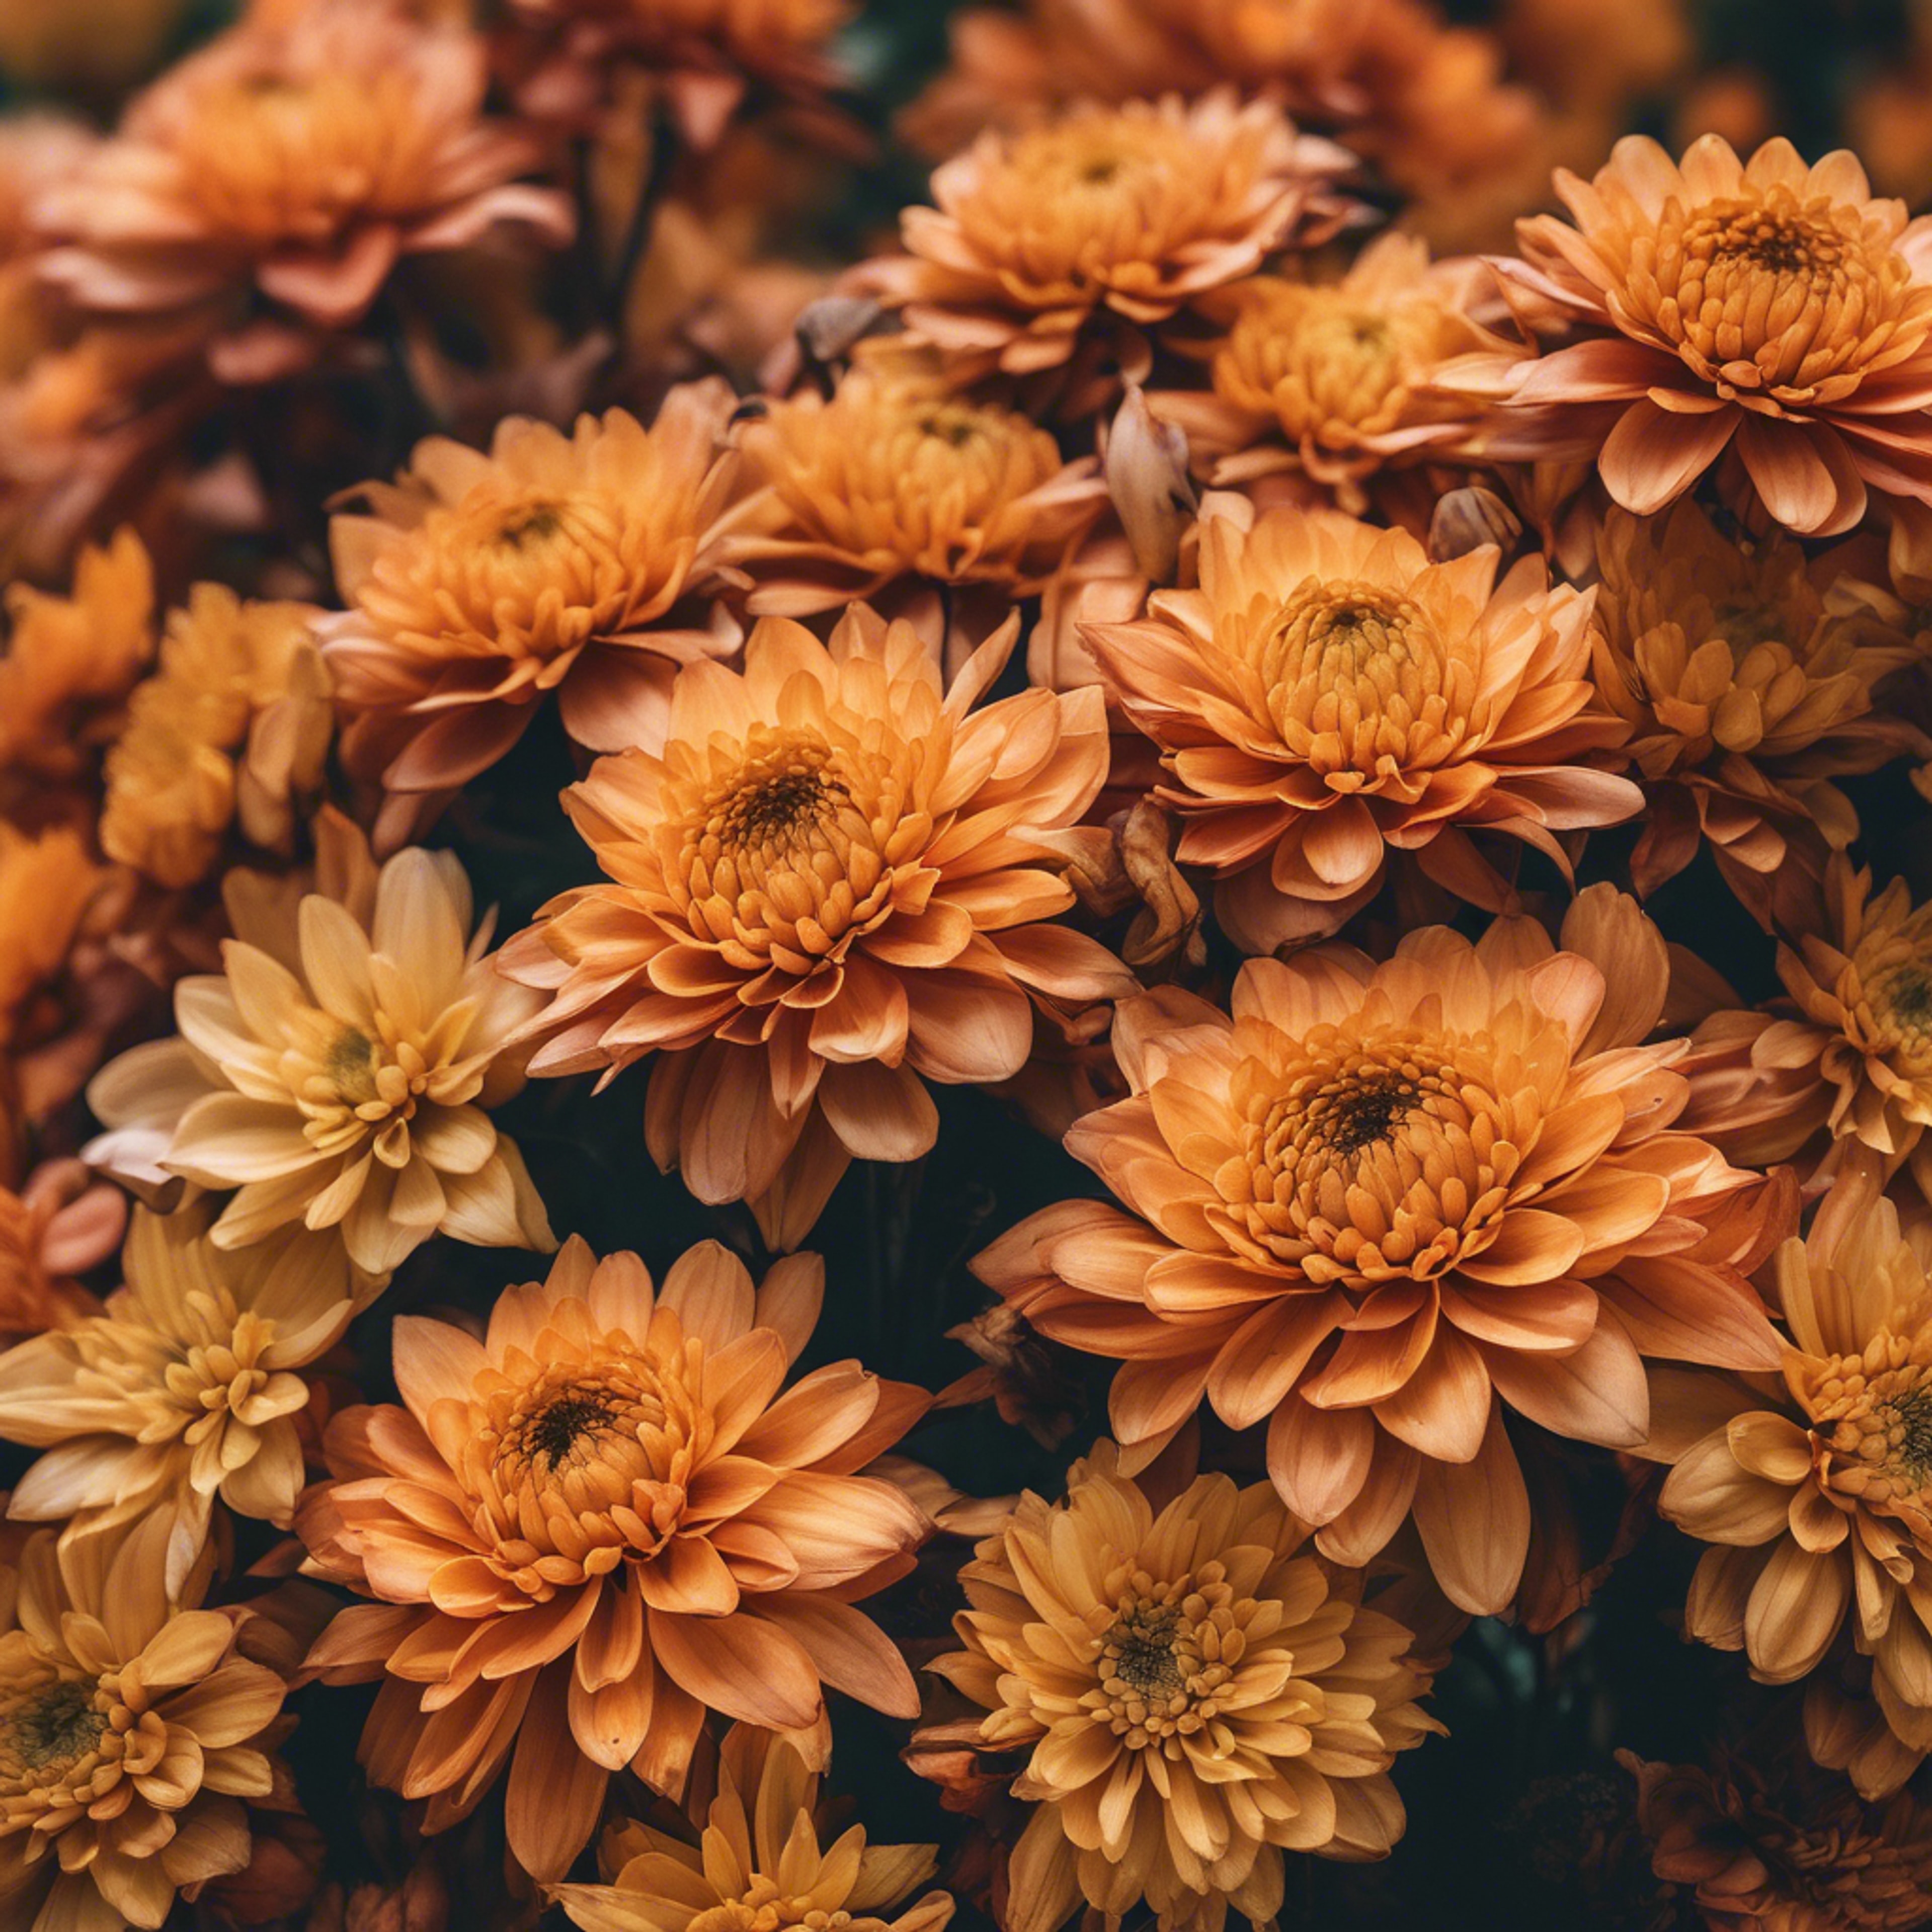 An autumnal floral pattern featuring chrysanthemums and maples leaves in vivid oranges and yellows.壁紙[526b8ff40f3c4a0583a9]